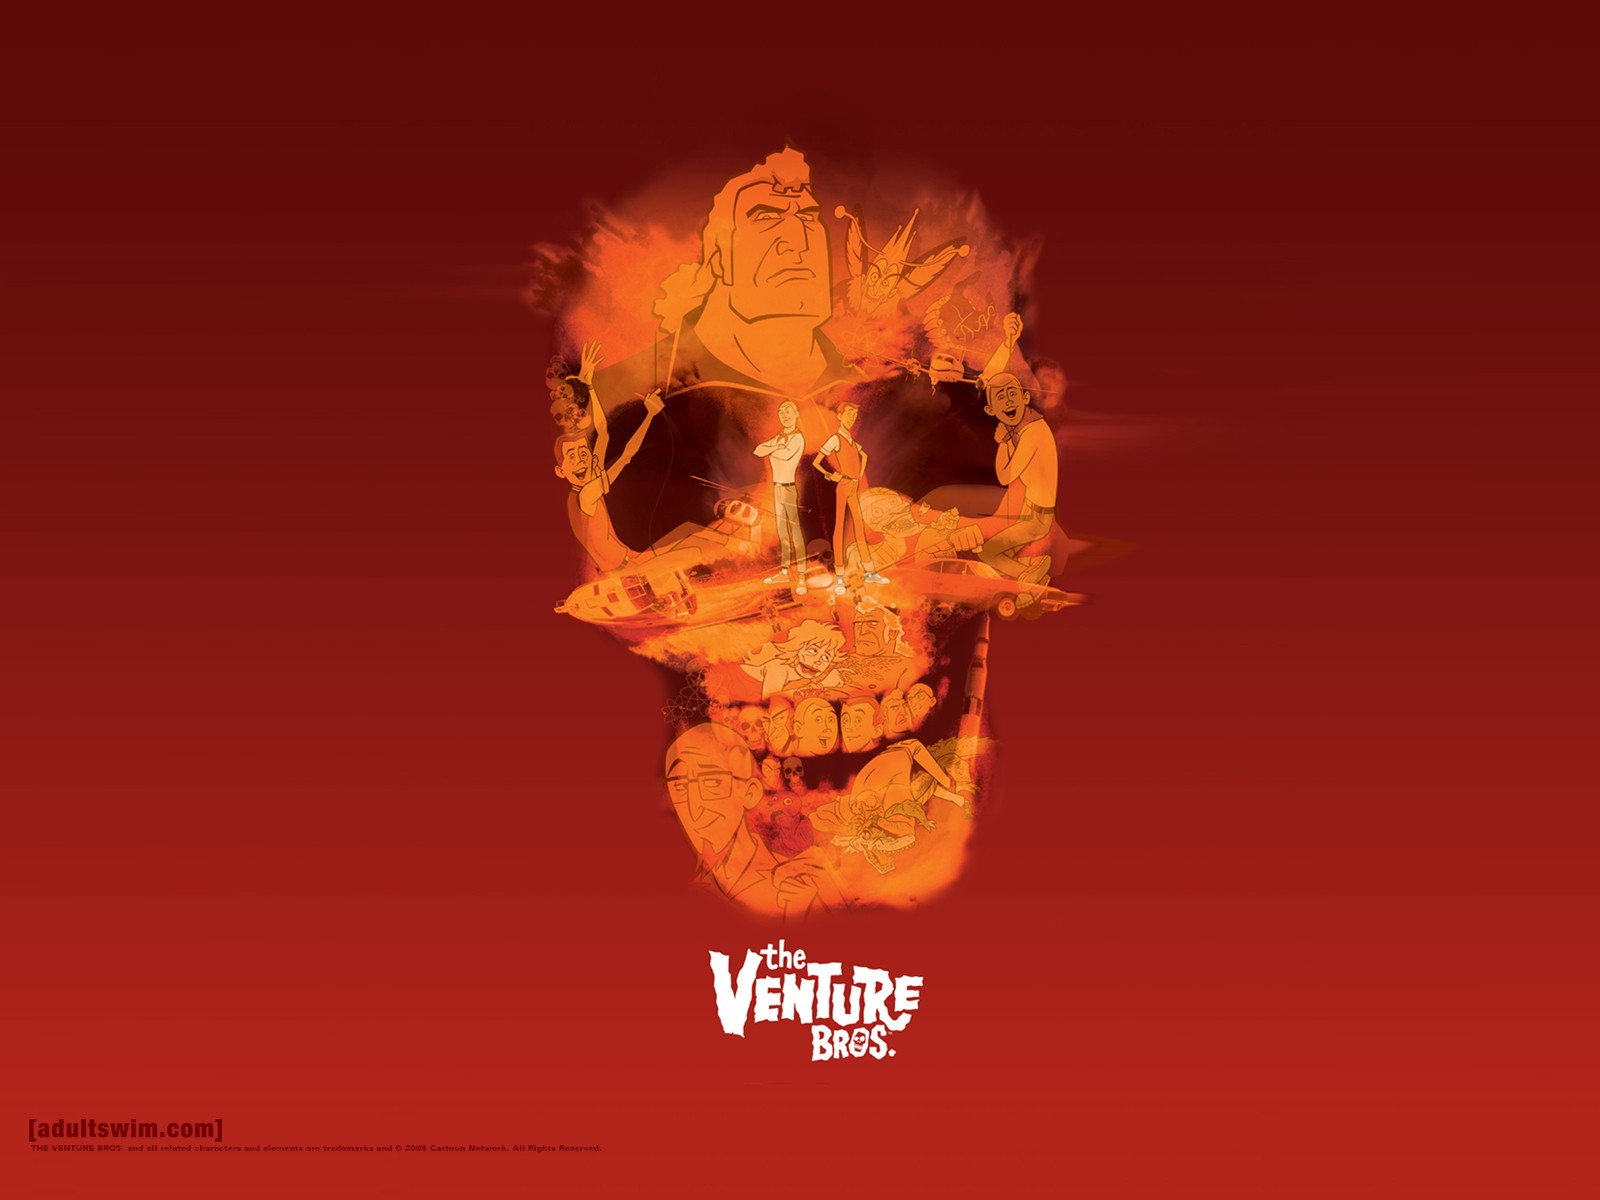 General 1600x1200 The Venture Bros. skull cartoon Adult Swim red red background